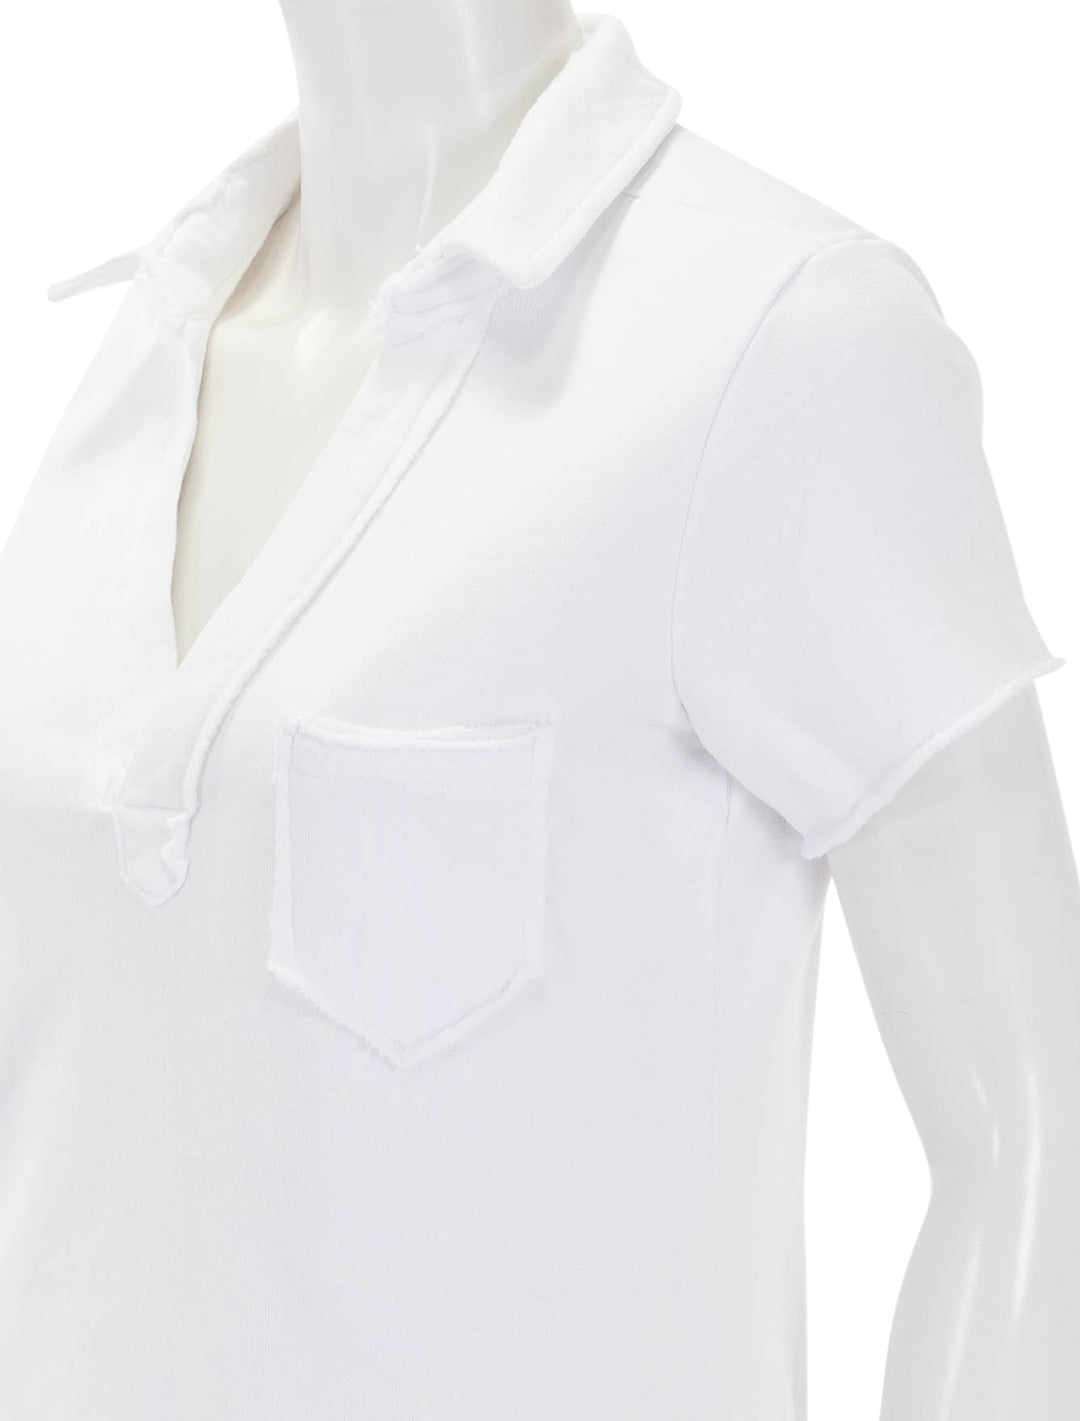 Close-up view of Frank & Eileen's lauren polo dress in white.